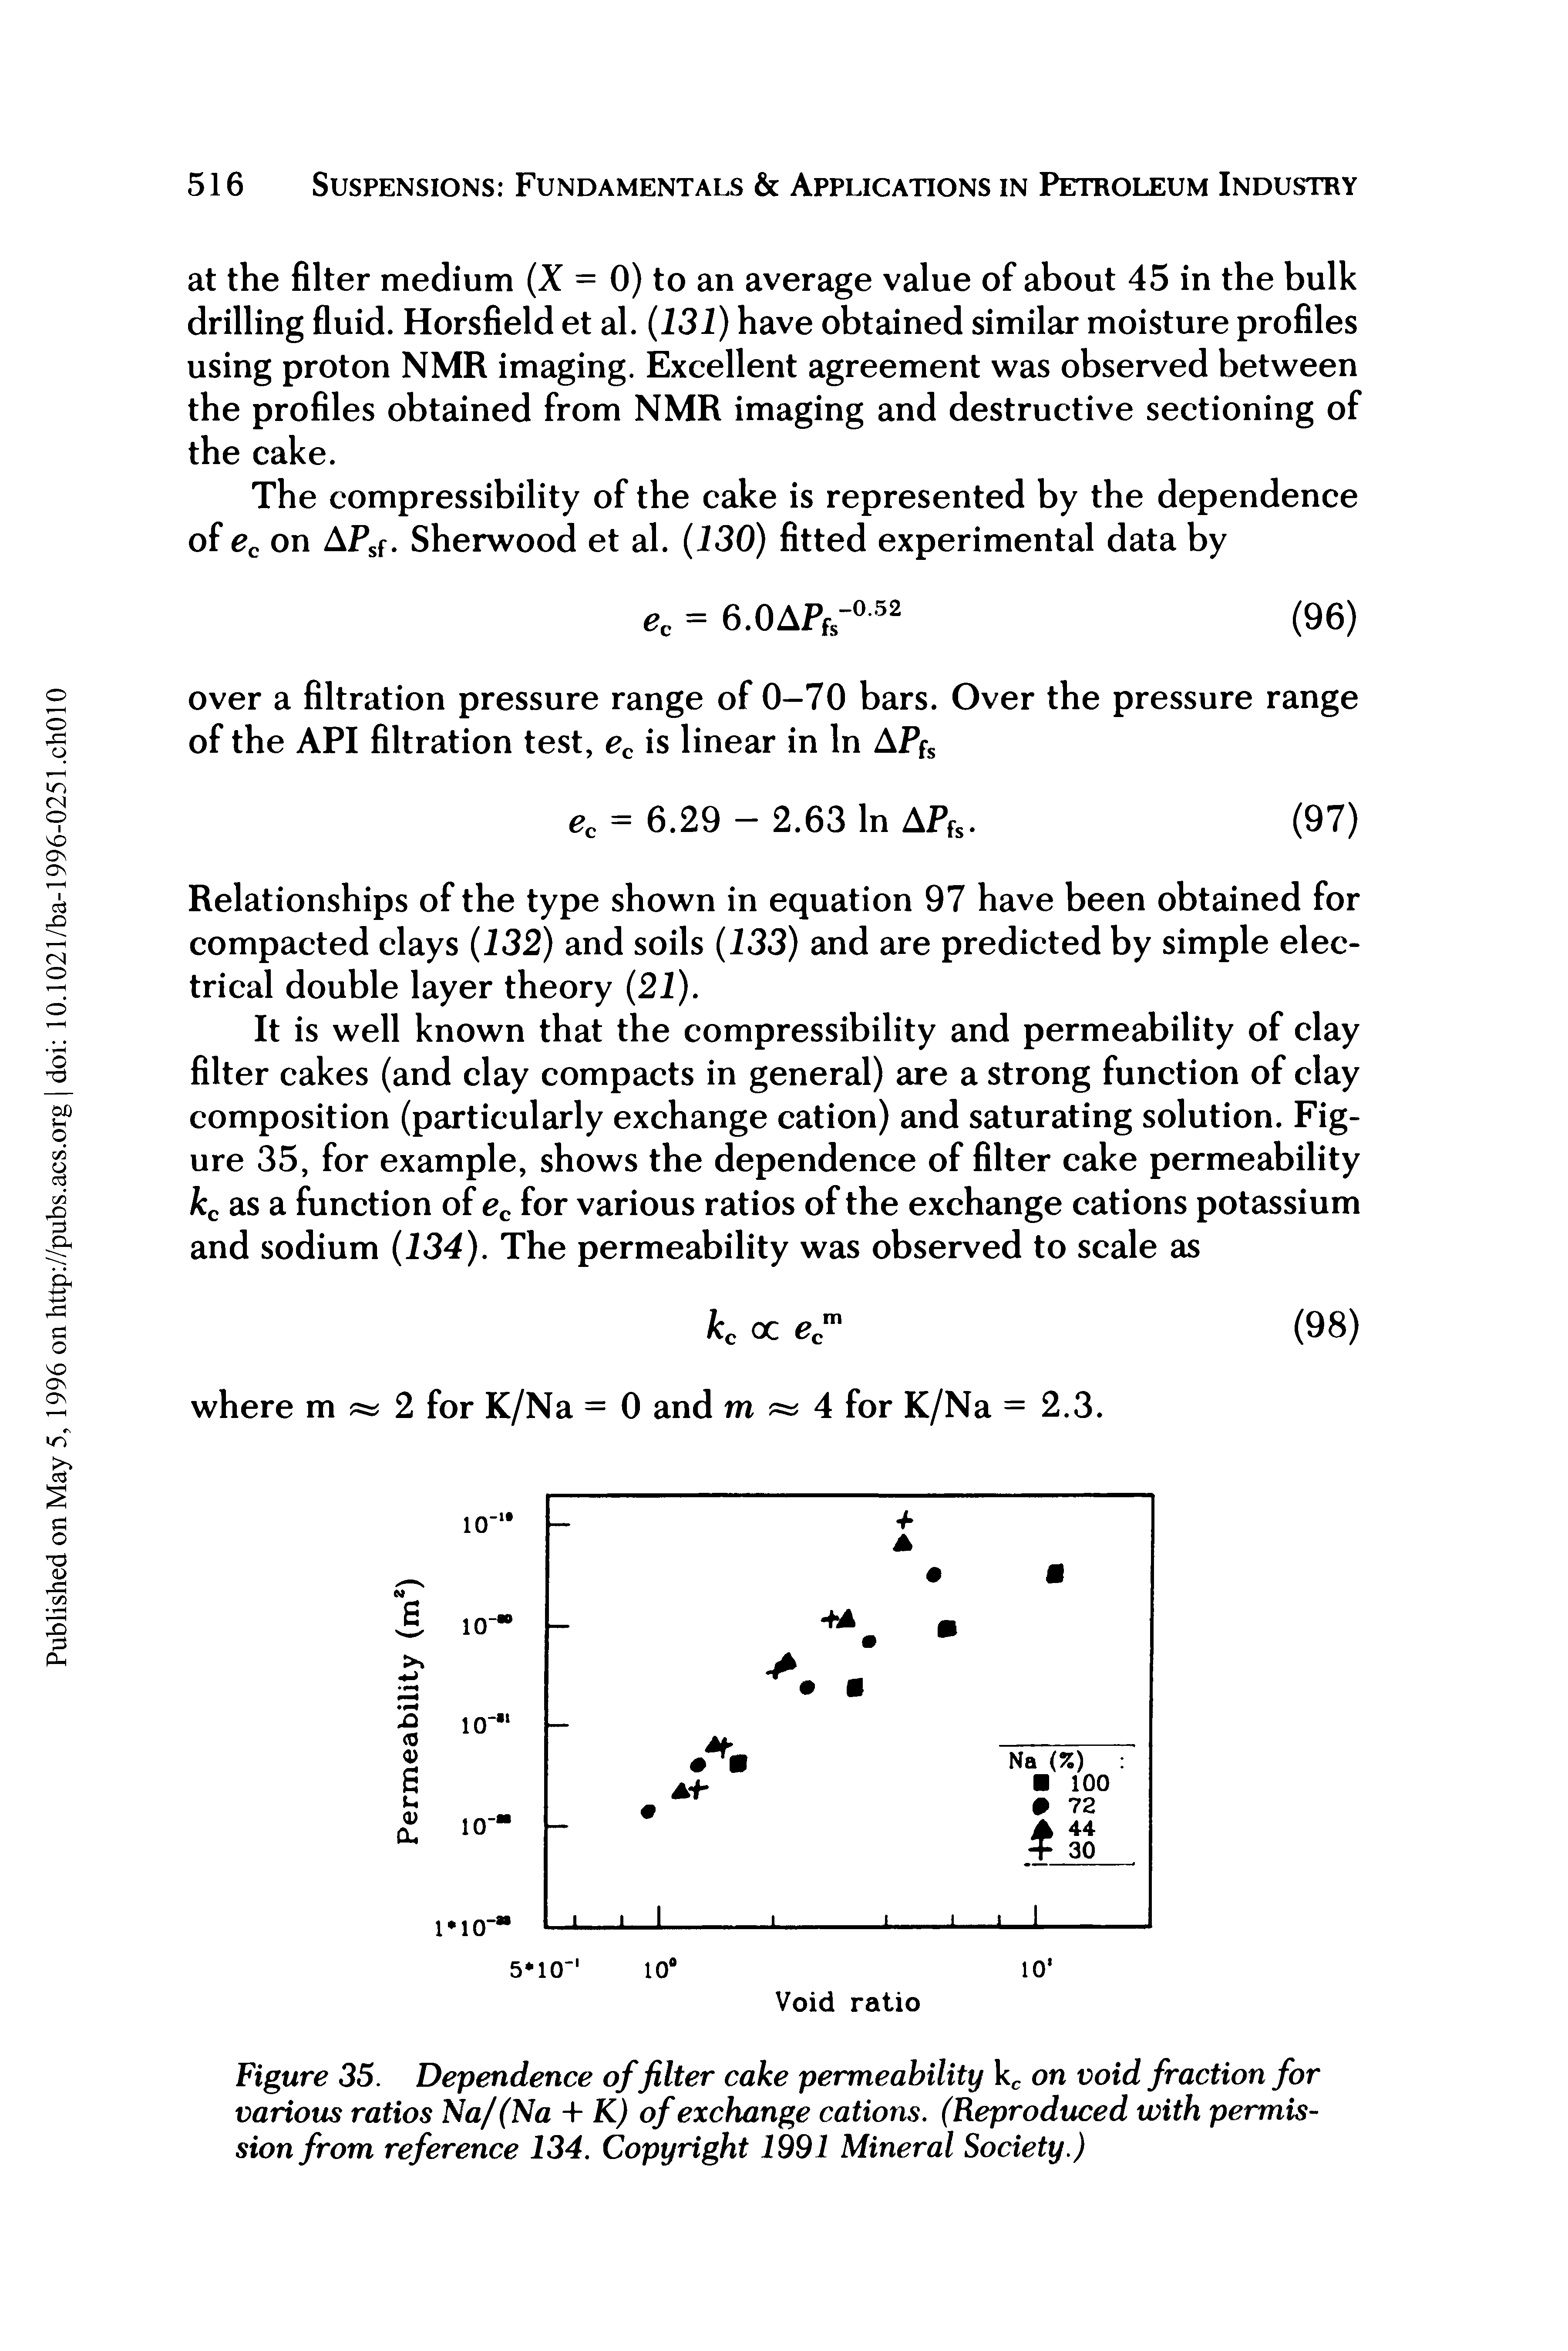 Figure 35. Dependence of filter cake permeability kc on void fraction for various ratios Na/(Na + K) of exchange cations. (Reproduced with permission from reference 134. Copyright 1991 Mineral Society.)...